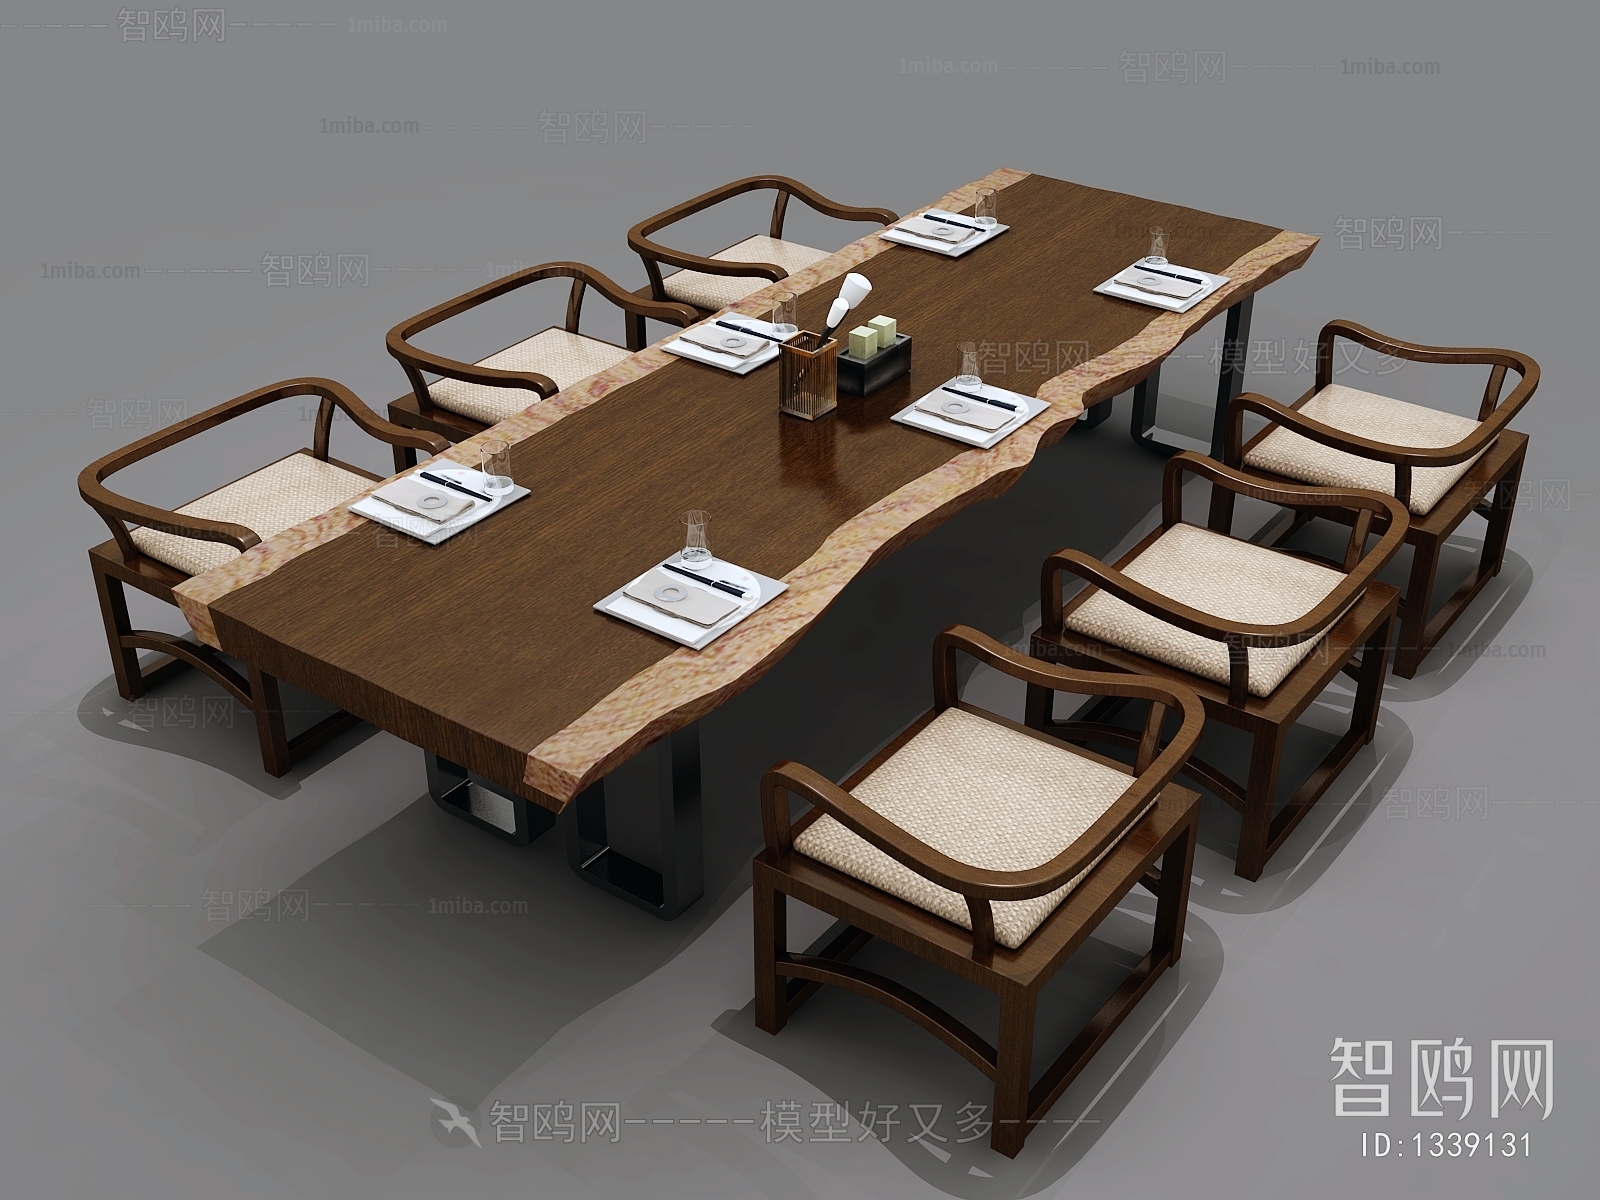 New Chinese Style Conference Table